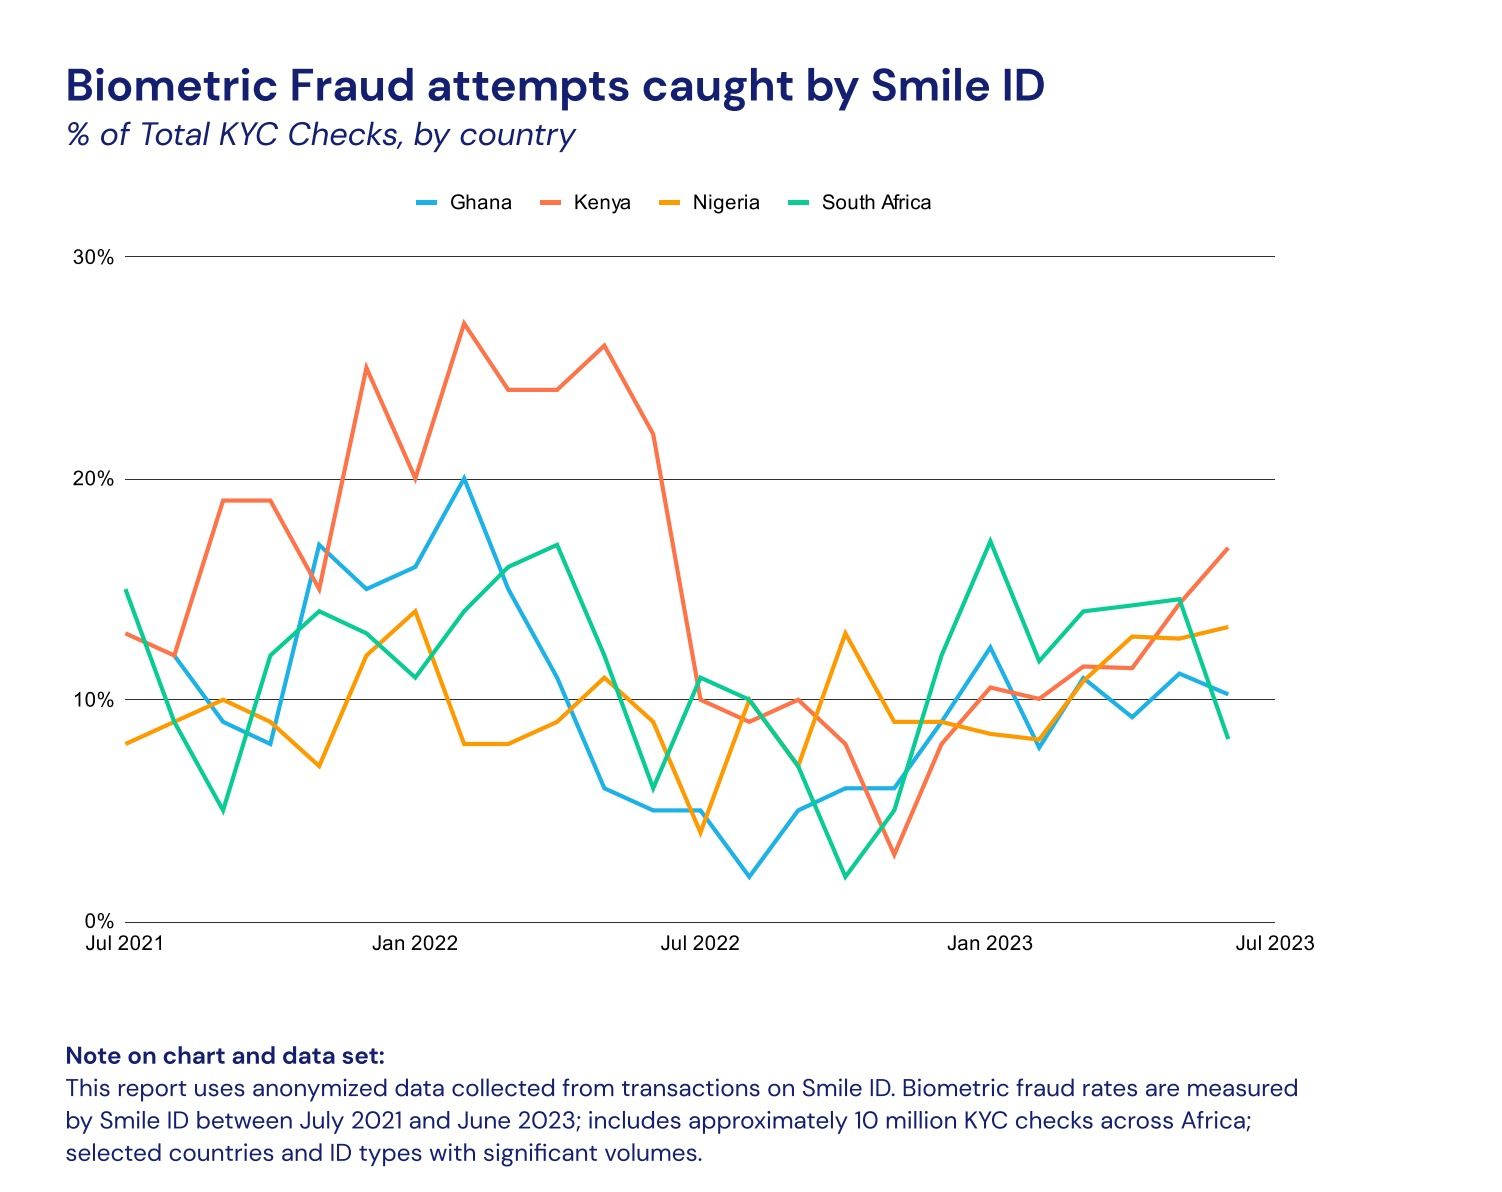 Smile ID chart showing fraud attempts across four key African markets